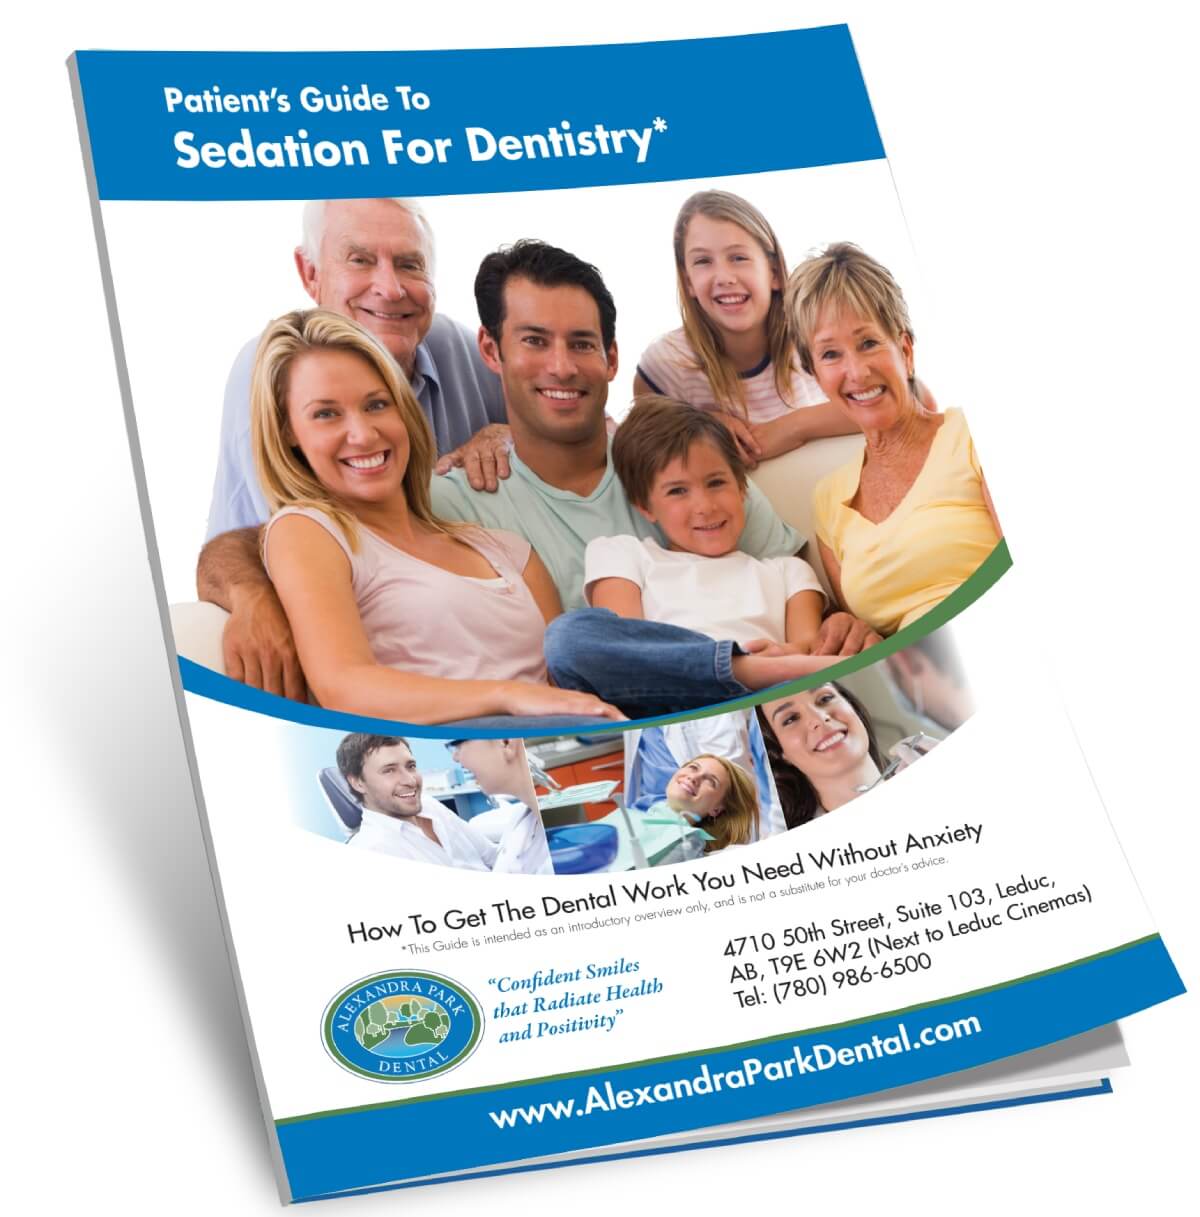 Booklet on guiding you through sedation in destistry